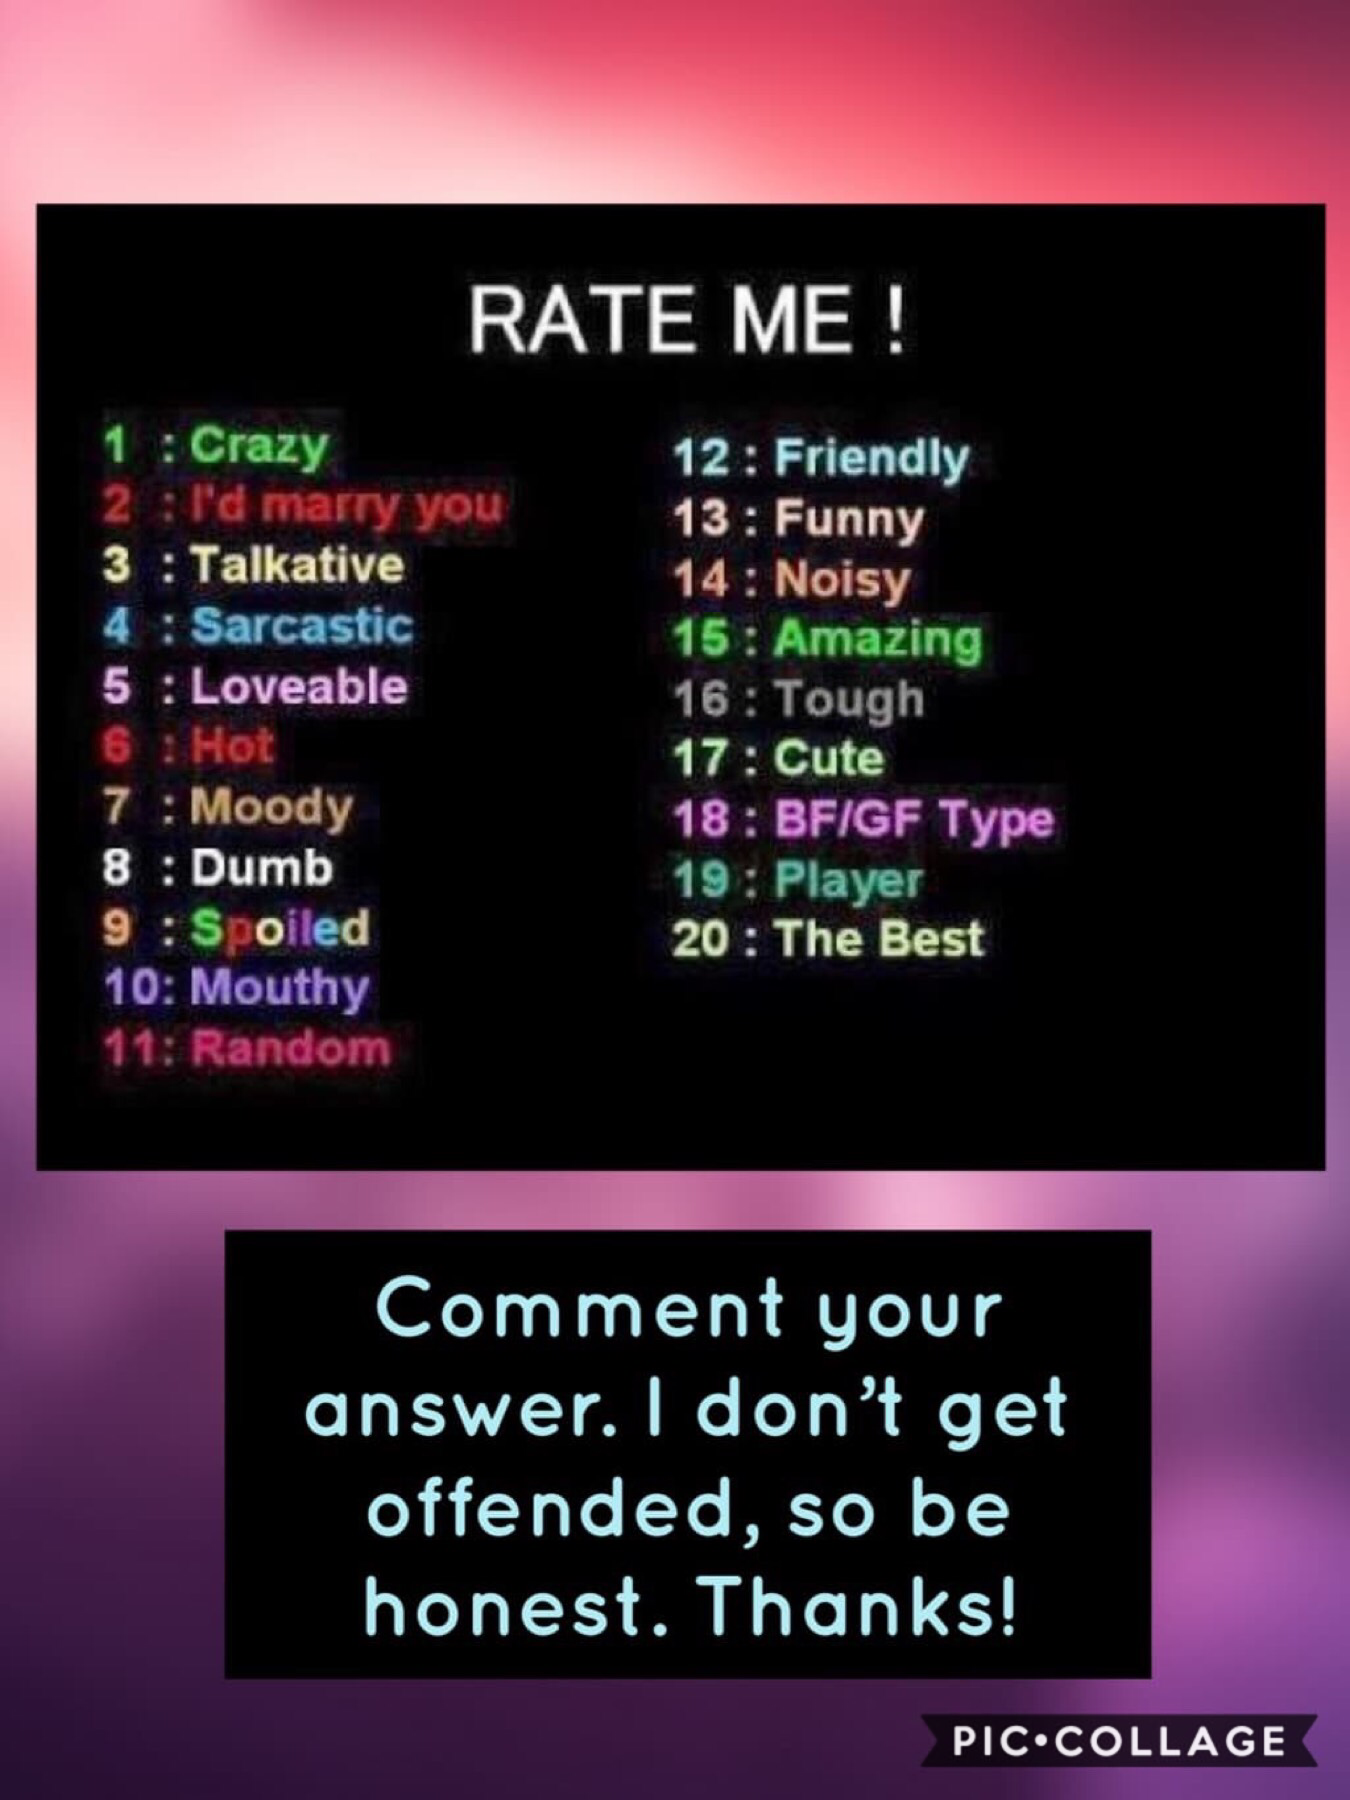 Rate me!